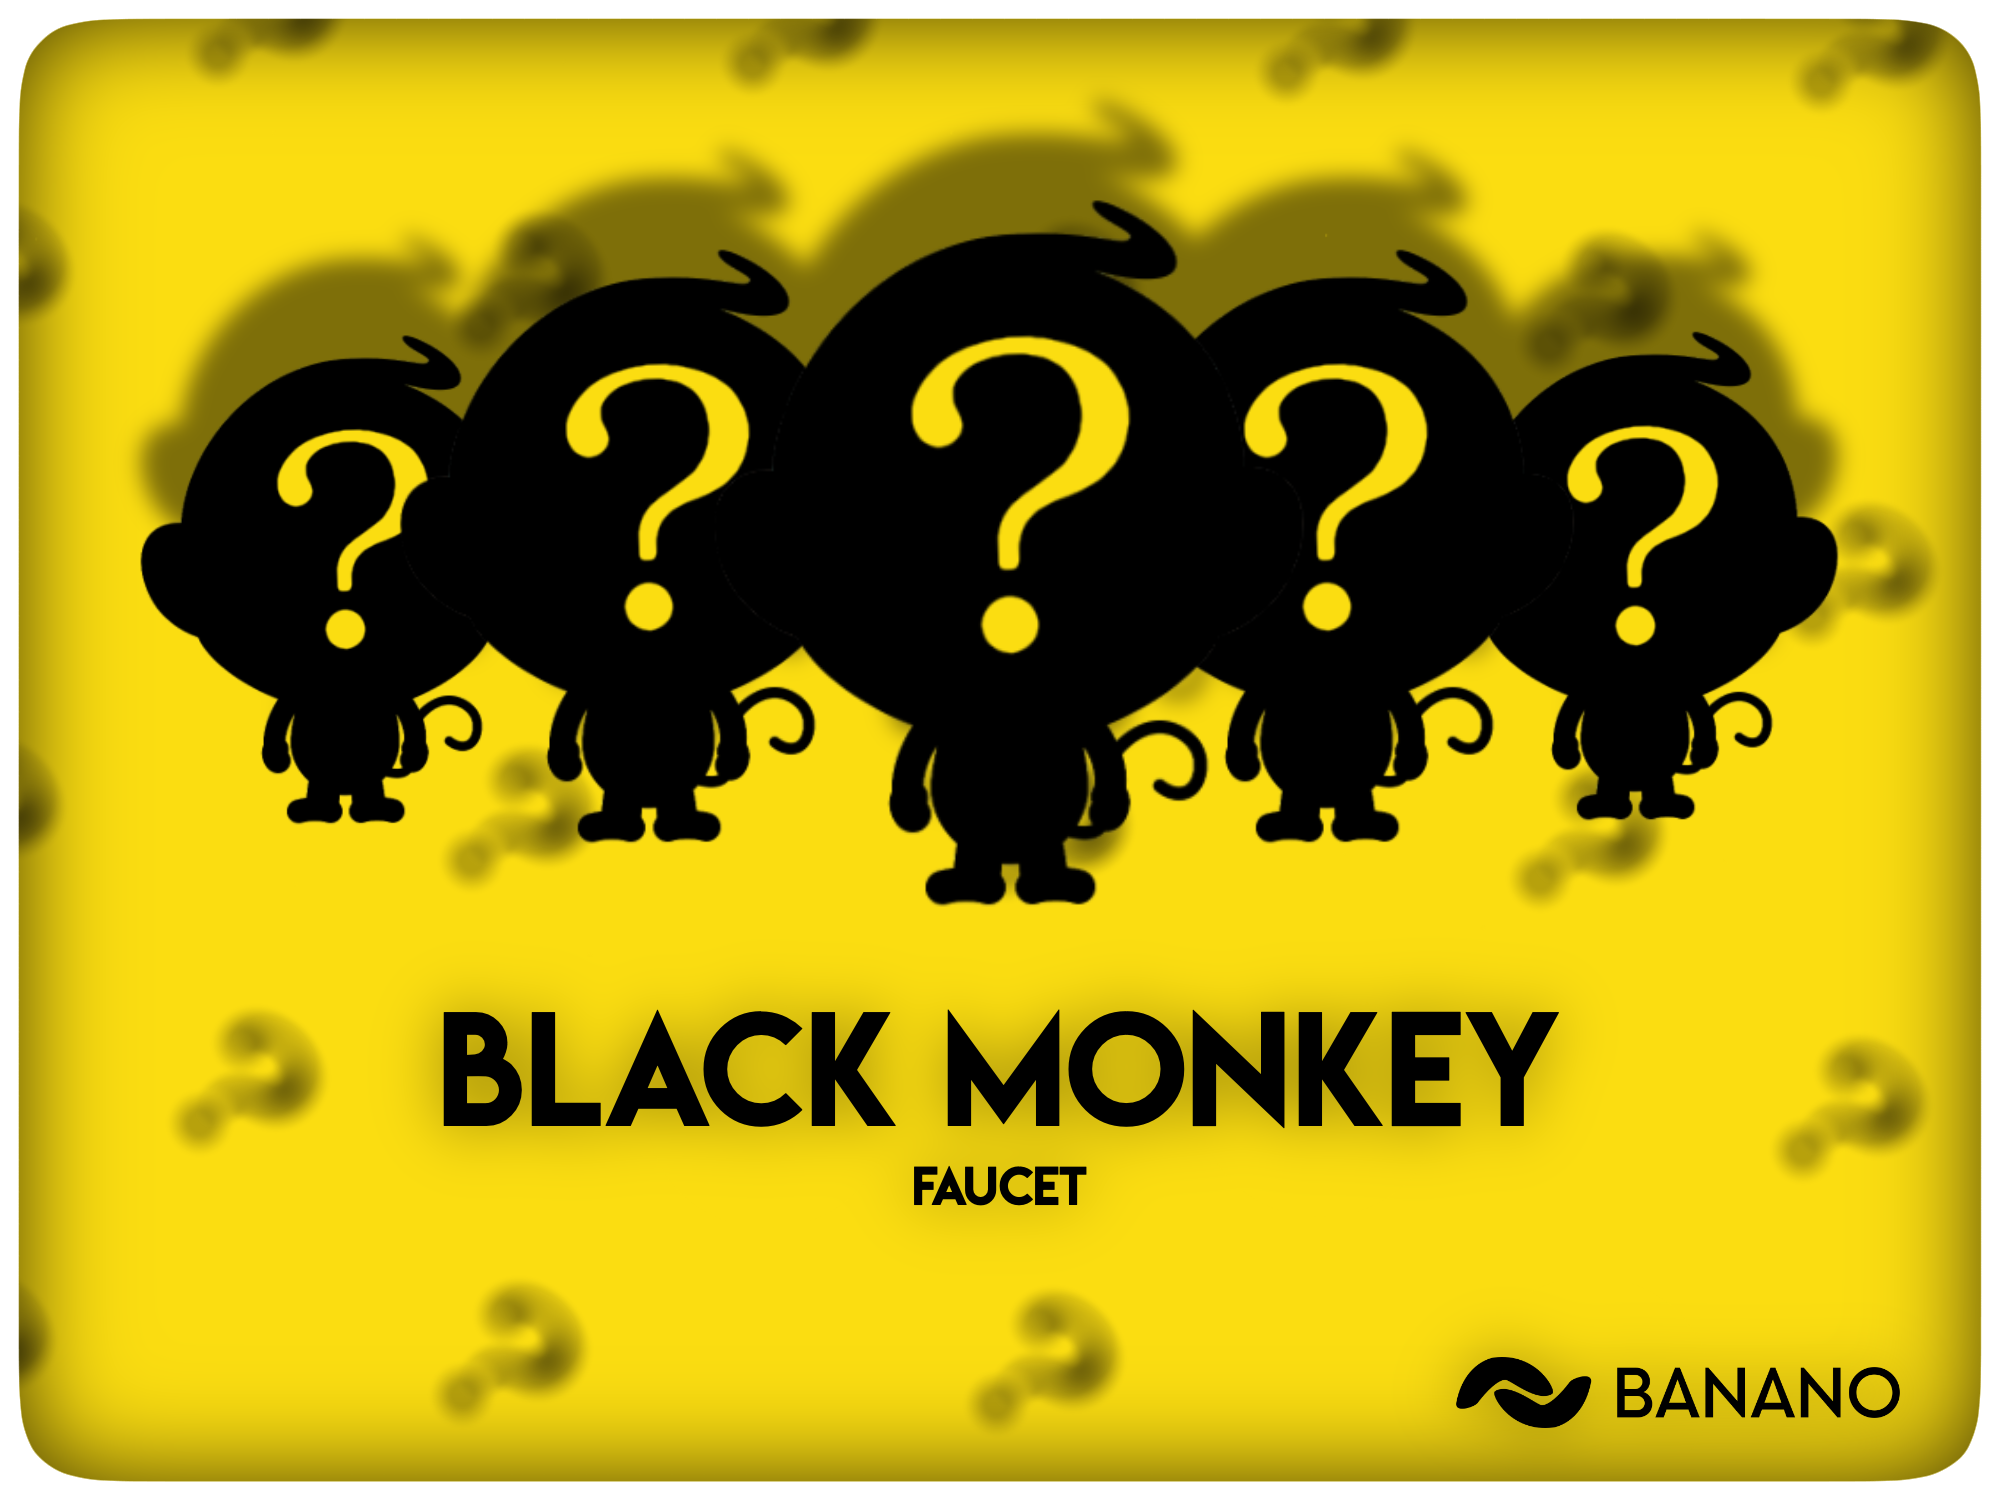 BANANO’s Faucet Game ‘Black Monkey’ is back! 24 hours only!